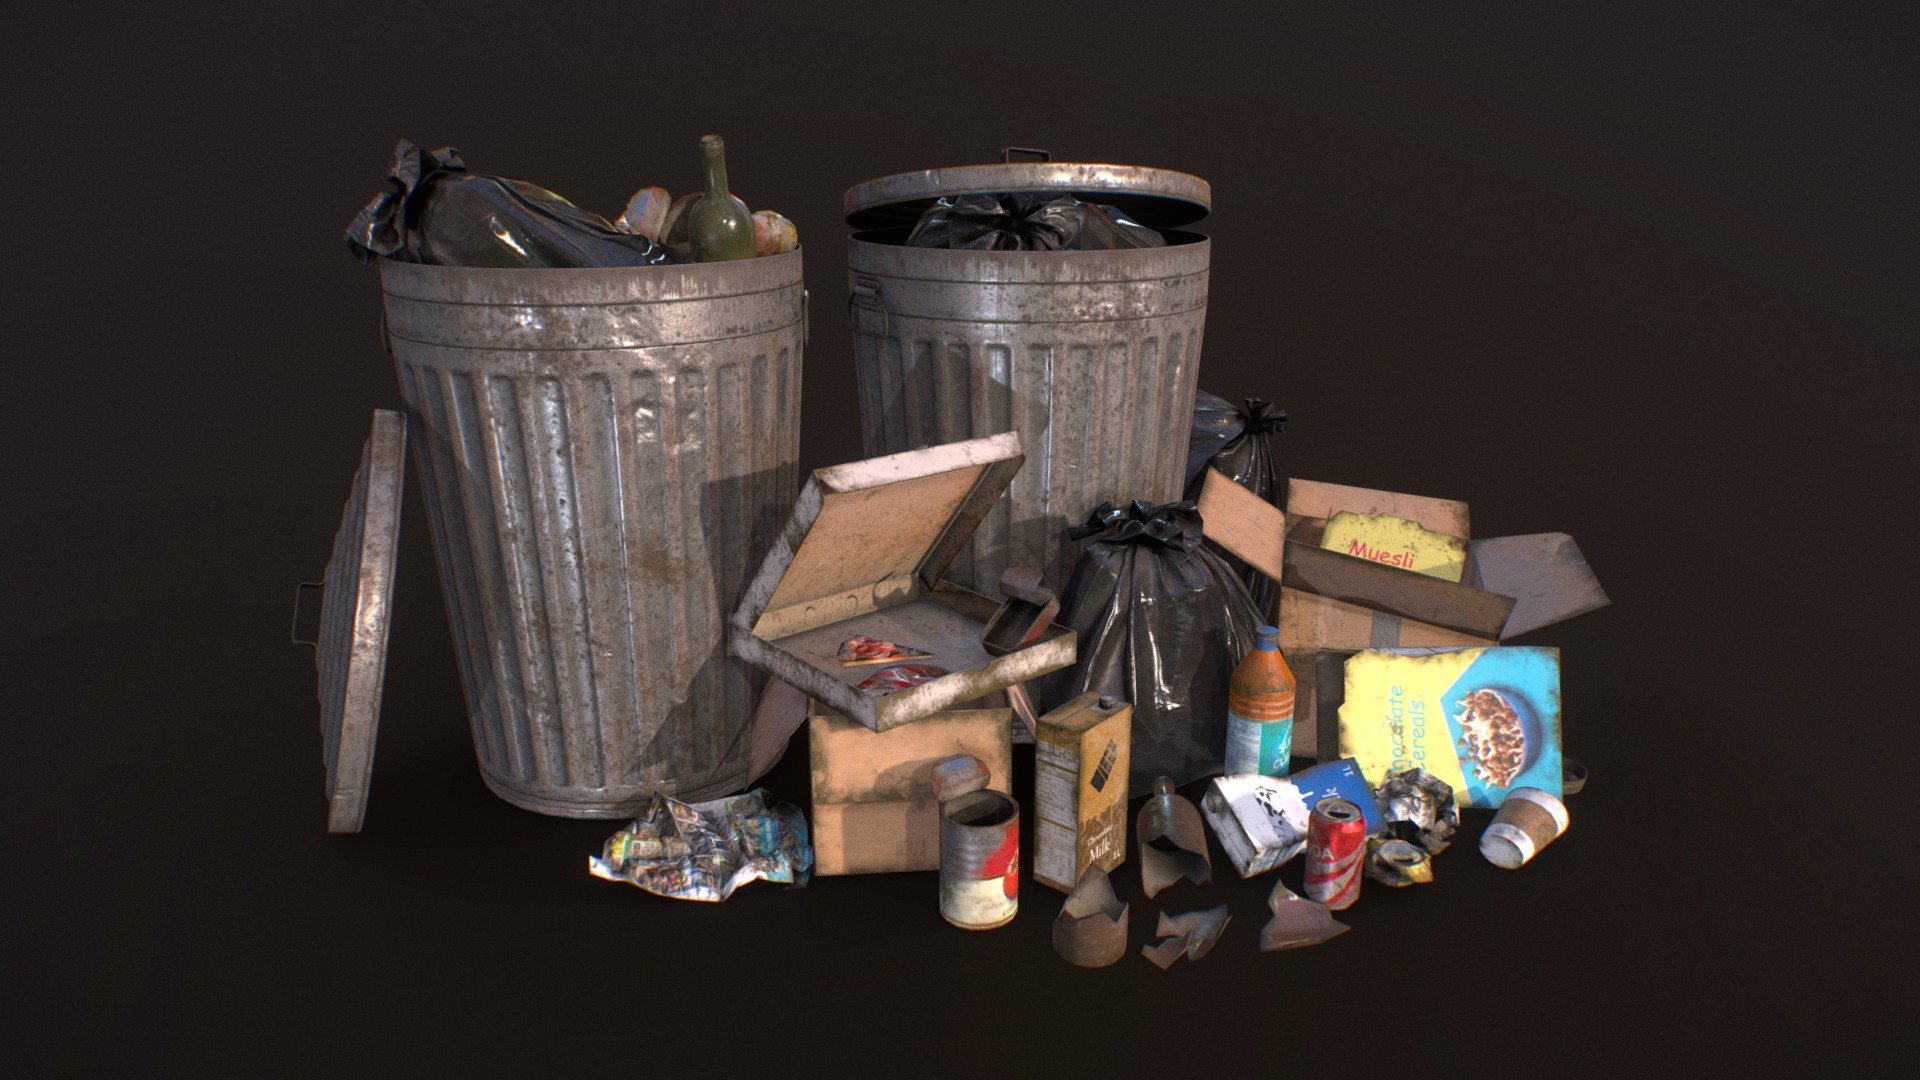 Low Poly urban street trash pack:




Game Ready

The unit of measurement used is centimeters

PBR Materials with 4k textures (1 set for all small props with 2 different levels of dirt, 1 for Garbage Bags with 3 different colors and 1 for Trash Can with 2 levels of dirt)

Albedo, Normals, Metalness, Roughness, AO and Opacity

This pack includes: 




Trash Can

Urban Trash: 3 carboard boxes - 2 cereal boxes - 3 cartons of milk - 4 types of paper with 4 levels of crumpling - 4 types of tins - 1 coffee cup with lid - 2 wine bottles - 2 broken bottles - 3 colors of soda cans with 4 levels of crushing - 2 plastic bottles - 1 pizza box with 1 piece of pizza

2 Garbage Bags

2 files included:




Urban Trash Pack Vol.1 Scene - Objects represented as seen in renders

Urban Trash Pack Vol.1 Set - All objects included in pack

Also included in Trash Pack Vol.2 &amp; 3

This model can be used for any game, personal project, etc. You may not resell any content

 - Urban Trash Pack Vol 1 - Low Poly - Buy Royalty Free 3D model by MSWoodvine 3d model